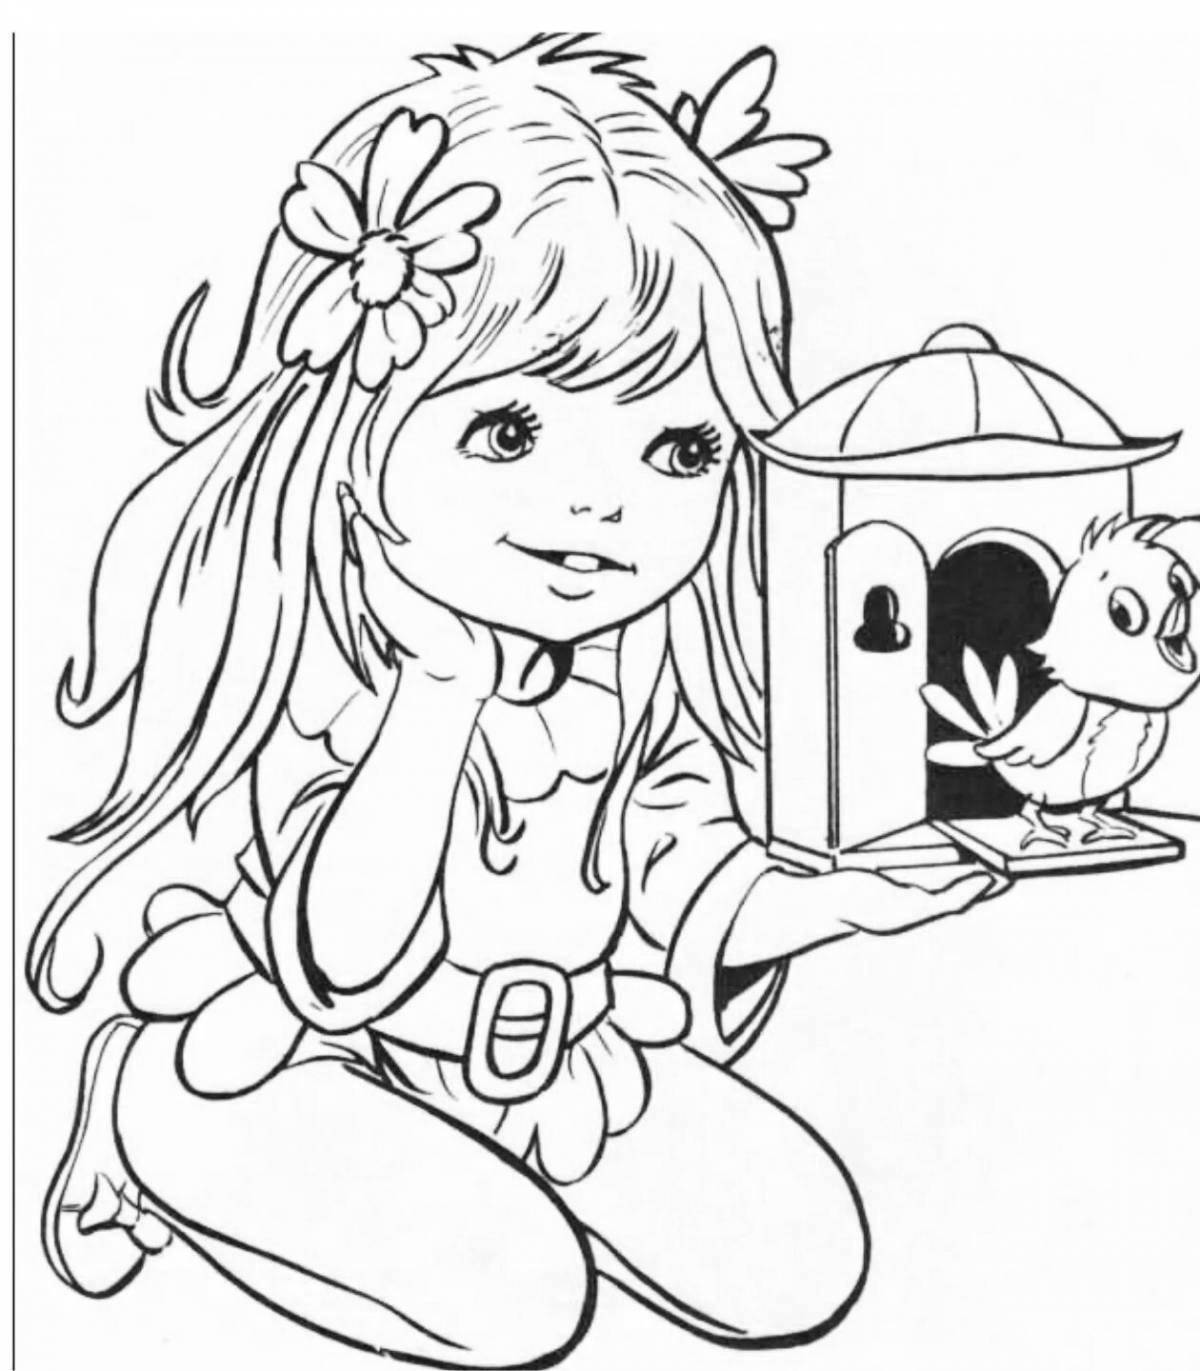 Fairytale coloring 7 for girls